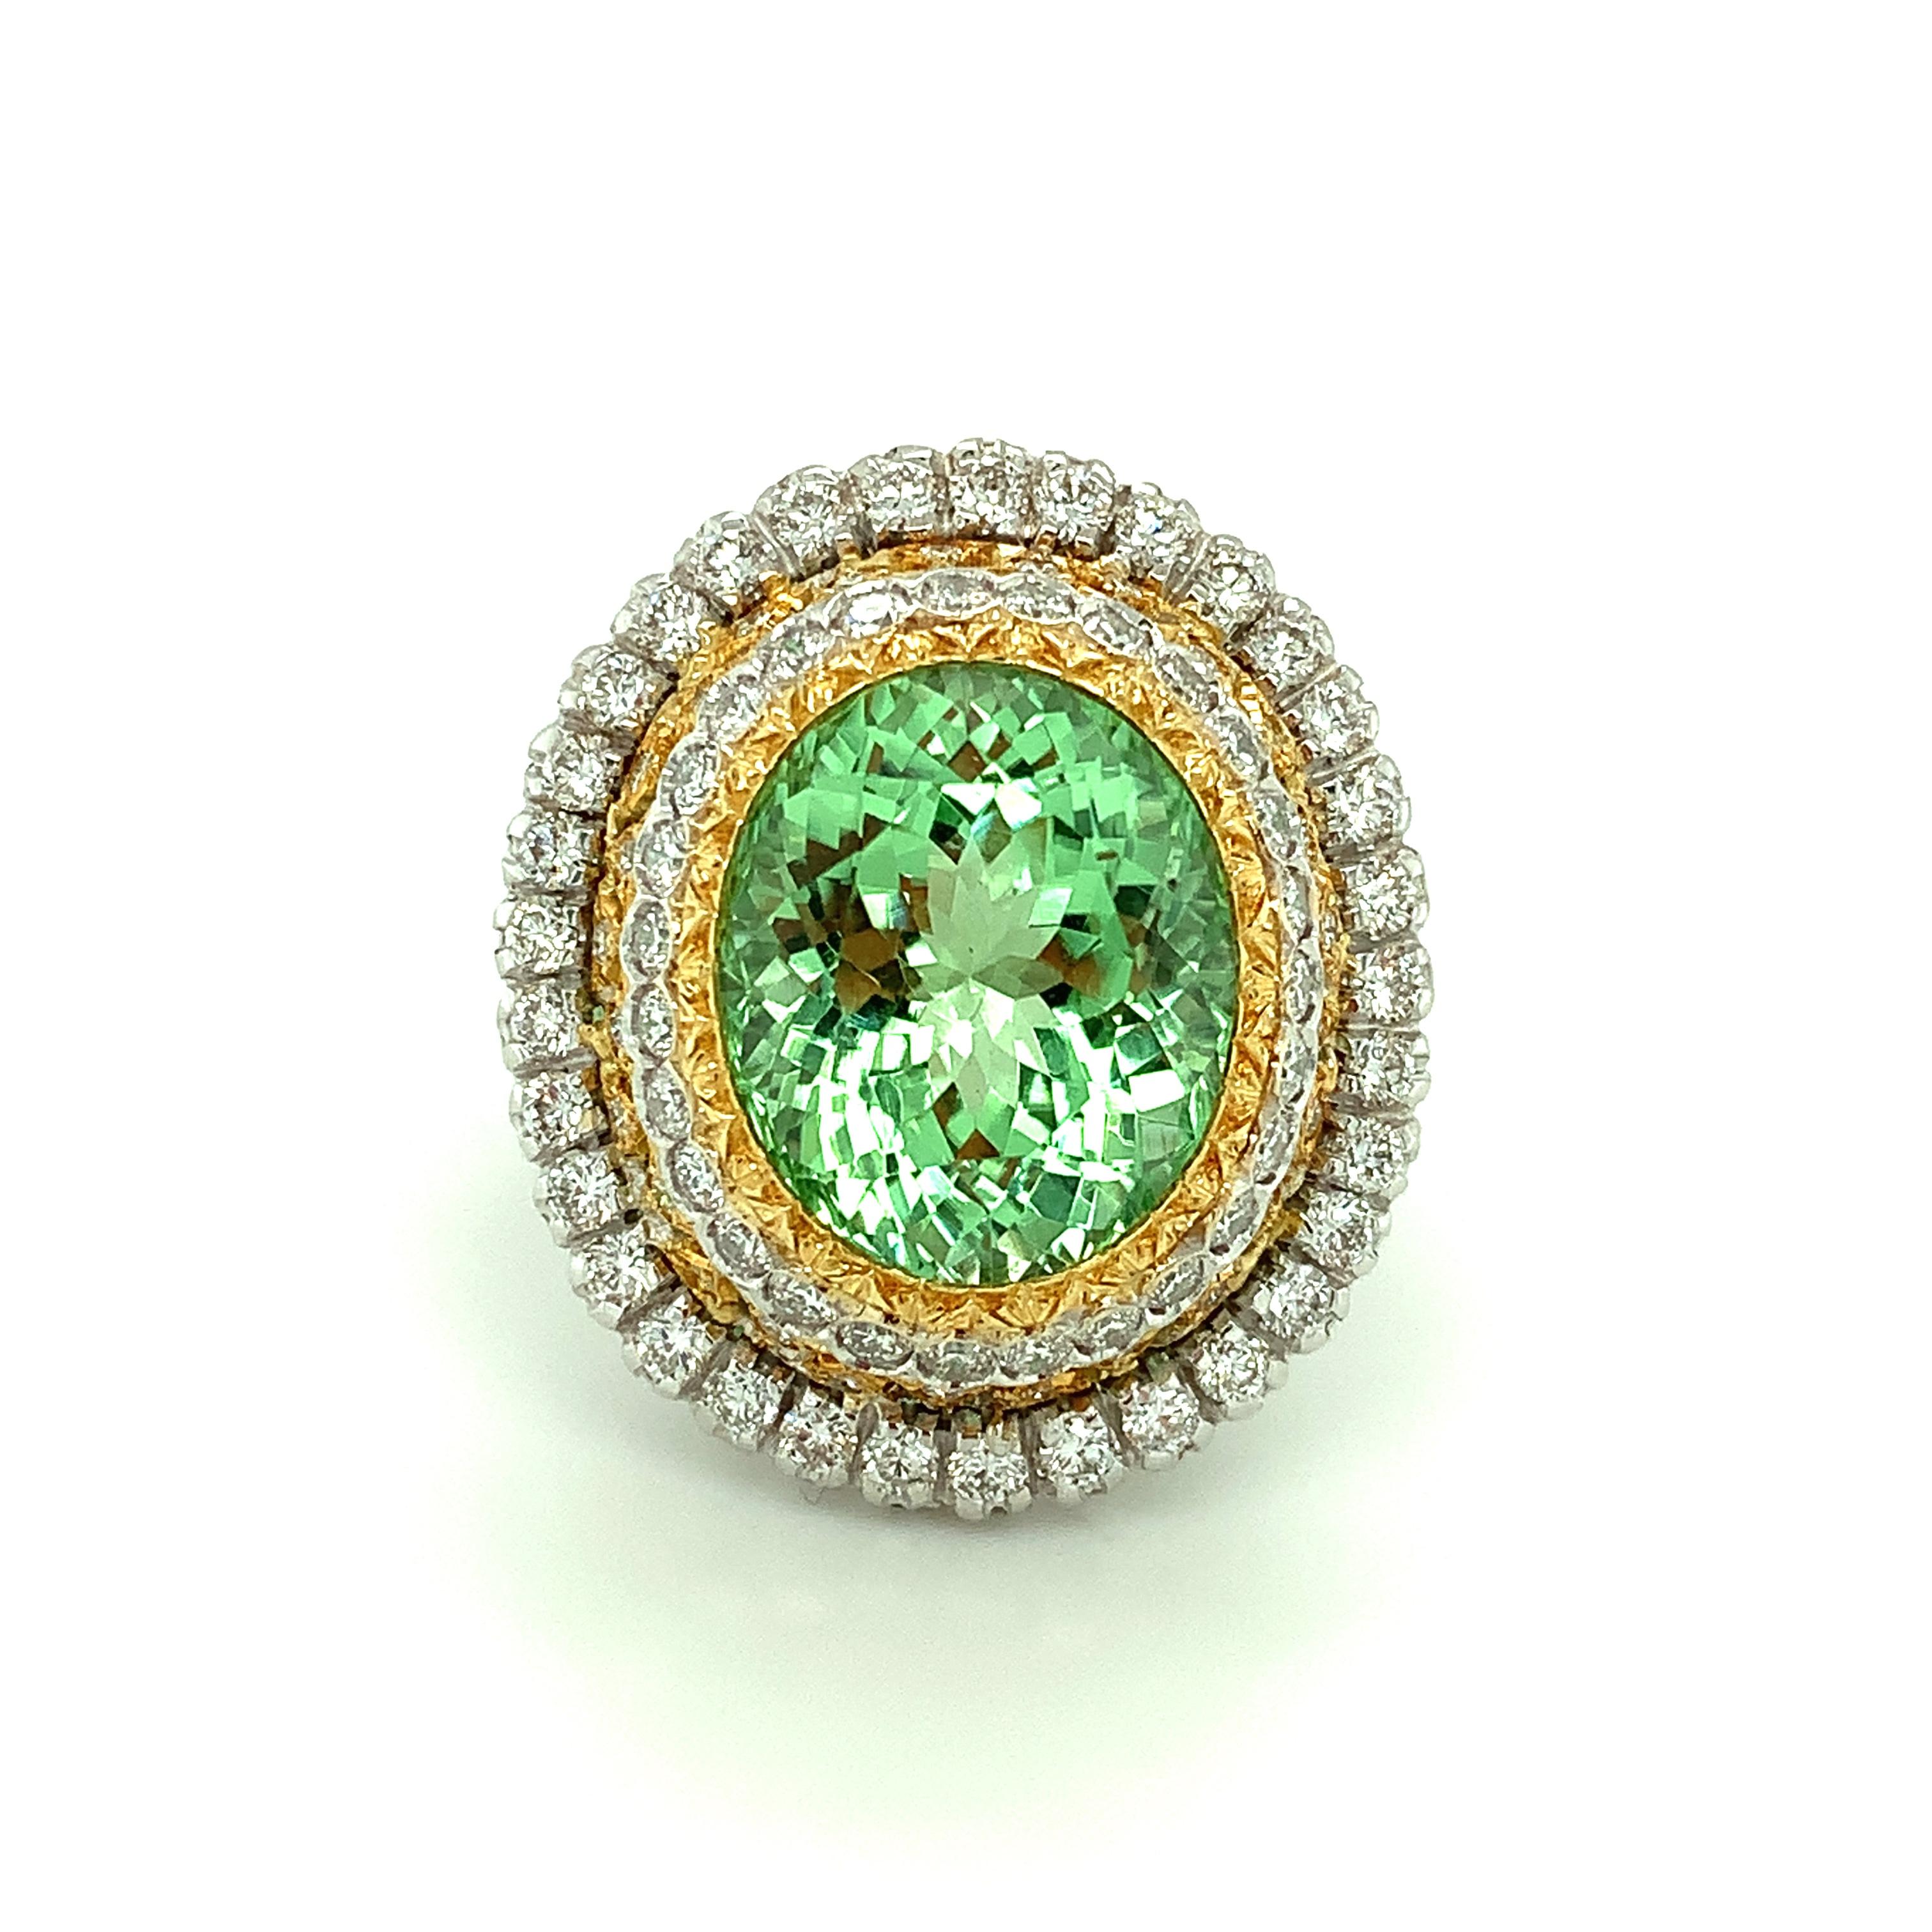 This beautifully handmade Italian ring features an exceptionally vibrant, 13.52 carat mint green tourmaline oval encircled by luxurious 18k gold and diamond halos! The tourmaline gemstone is a top-quality, crystalline beauty with exquisite mint